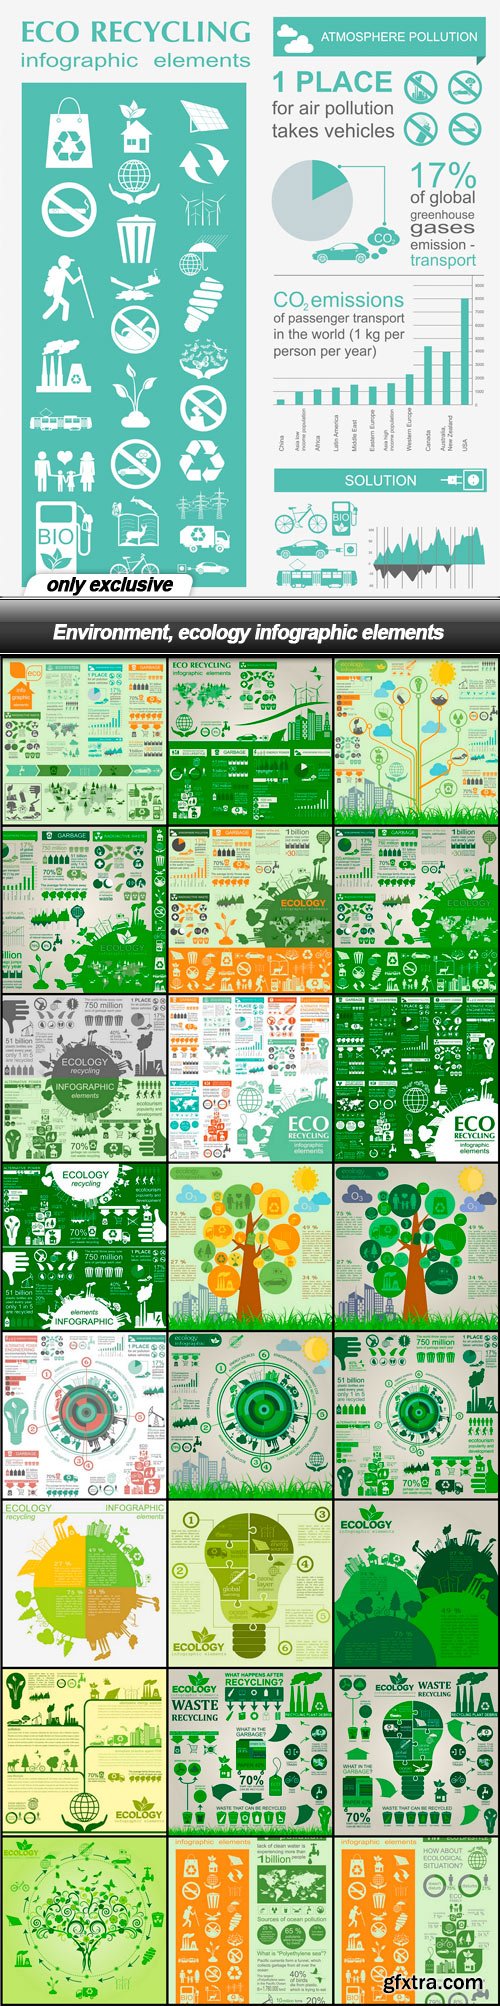 Environment, ecology infographic elements - 25 EPS